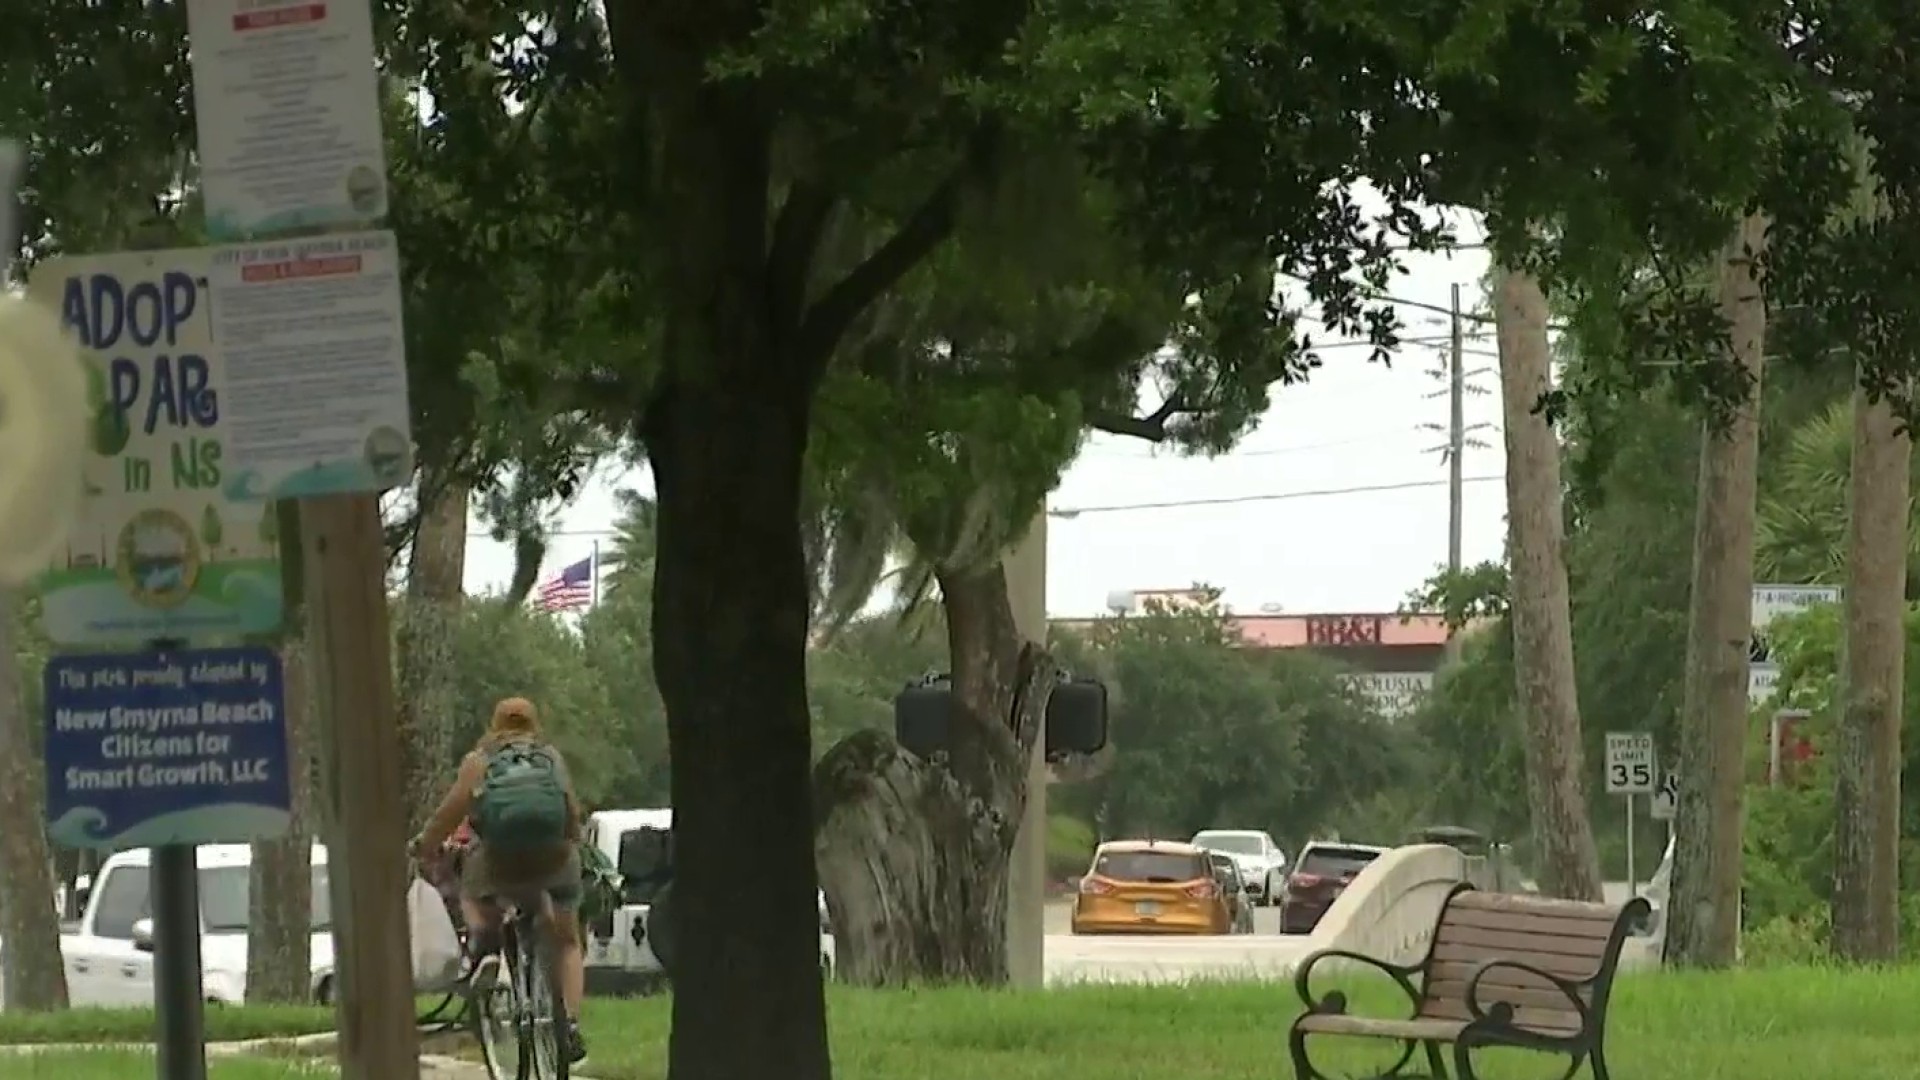 New Smyrna Beach Sees Growing Homeless Population